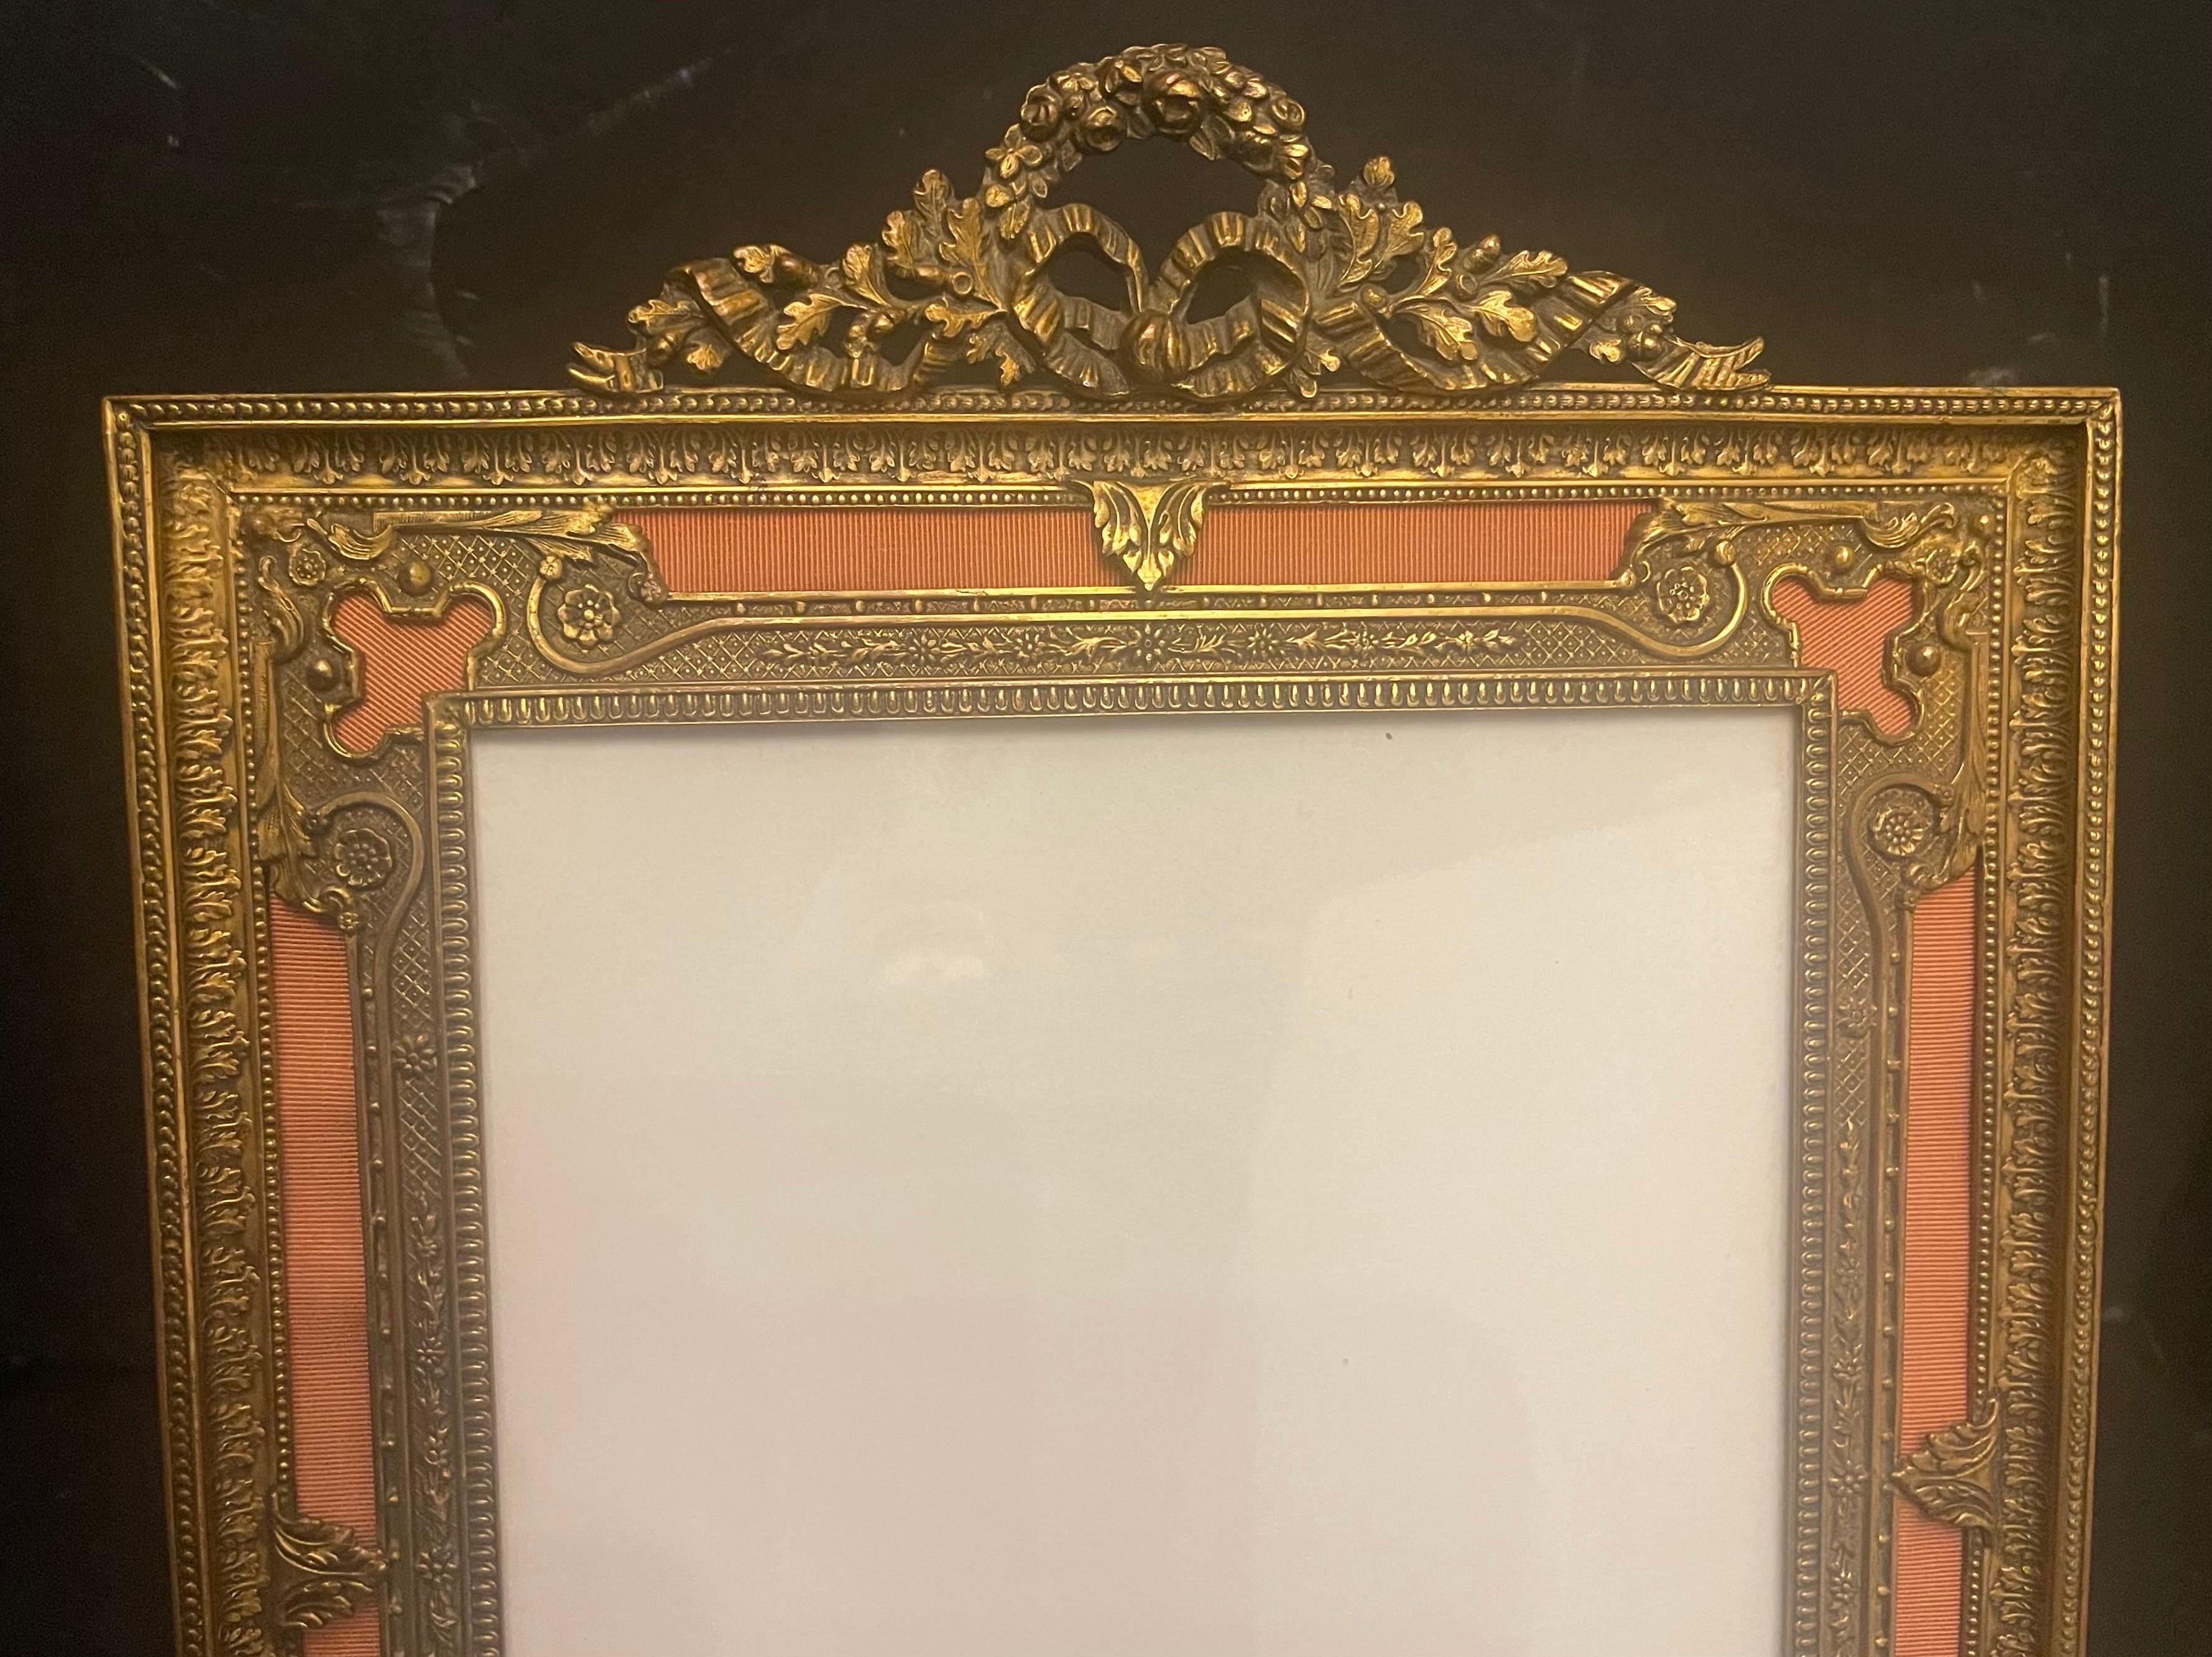 A Very Fine Large French Louis XVI Bronze & Ormolu Picture Frame Wreath Garland Crown And Coral Colored Silk Inset